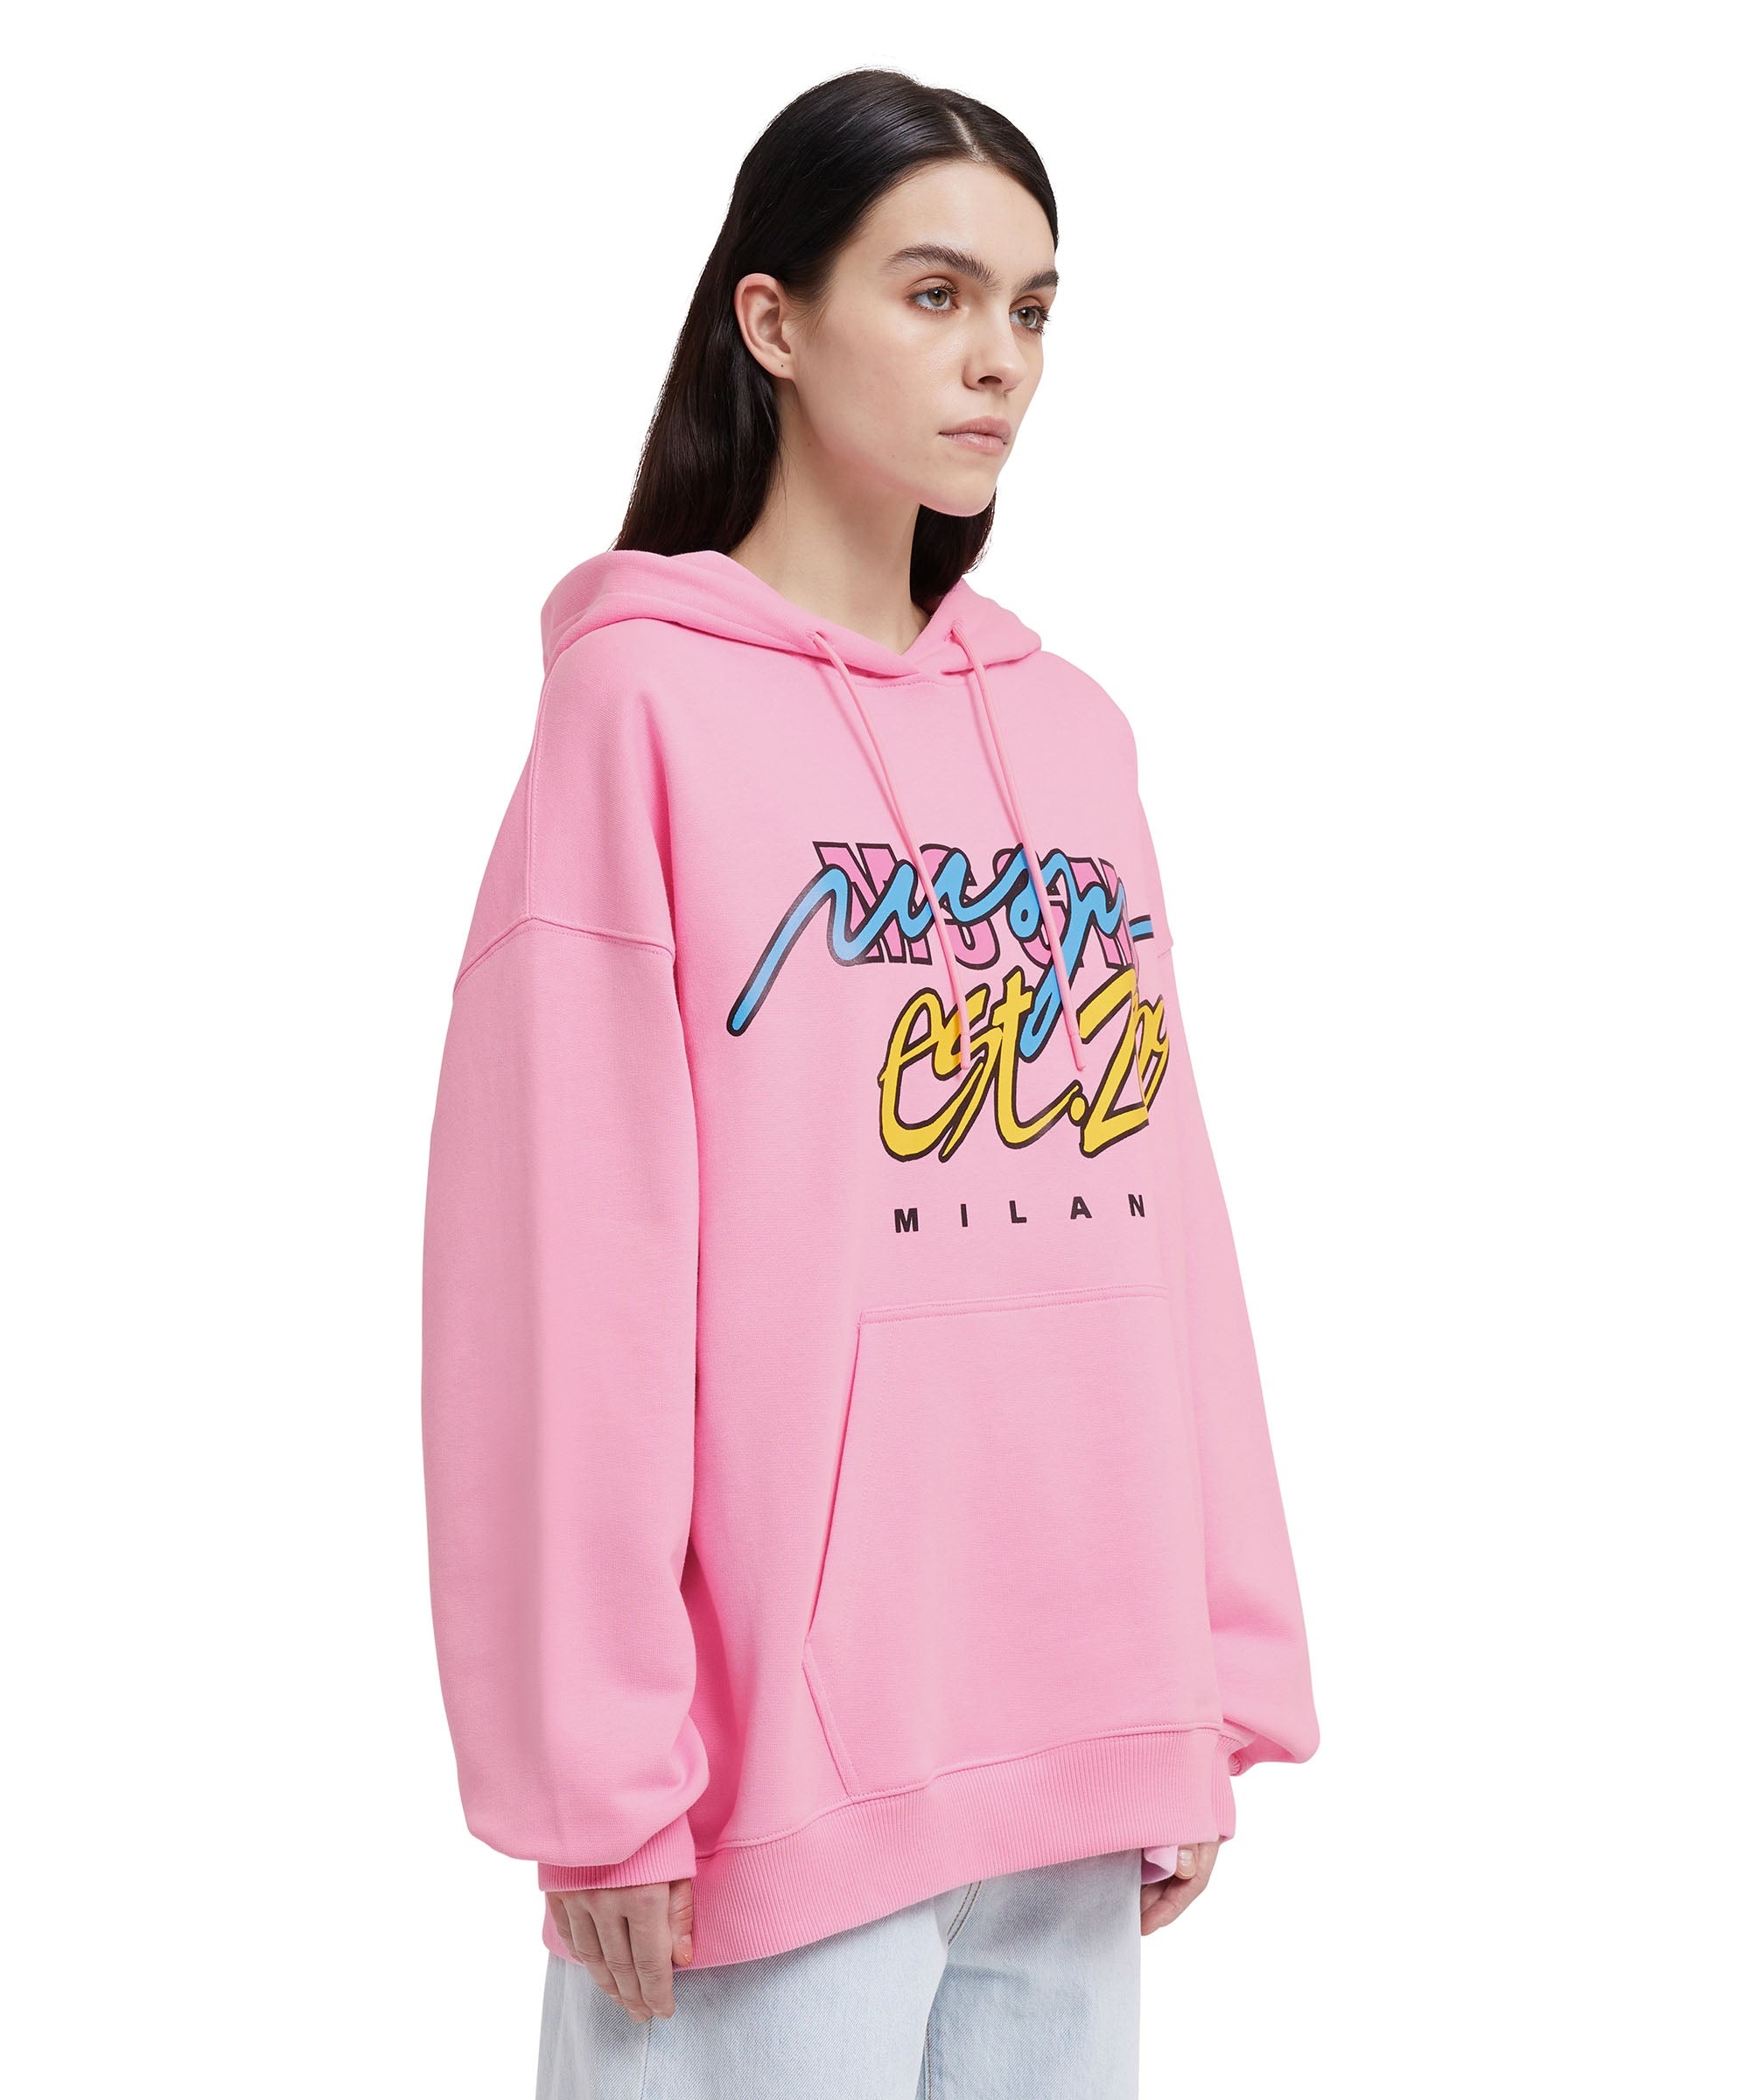 Hooded sweatshirt with "Street style" graphic - 4